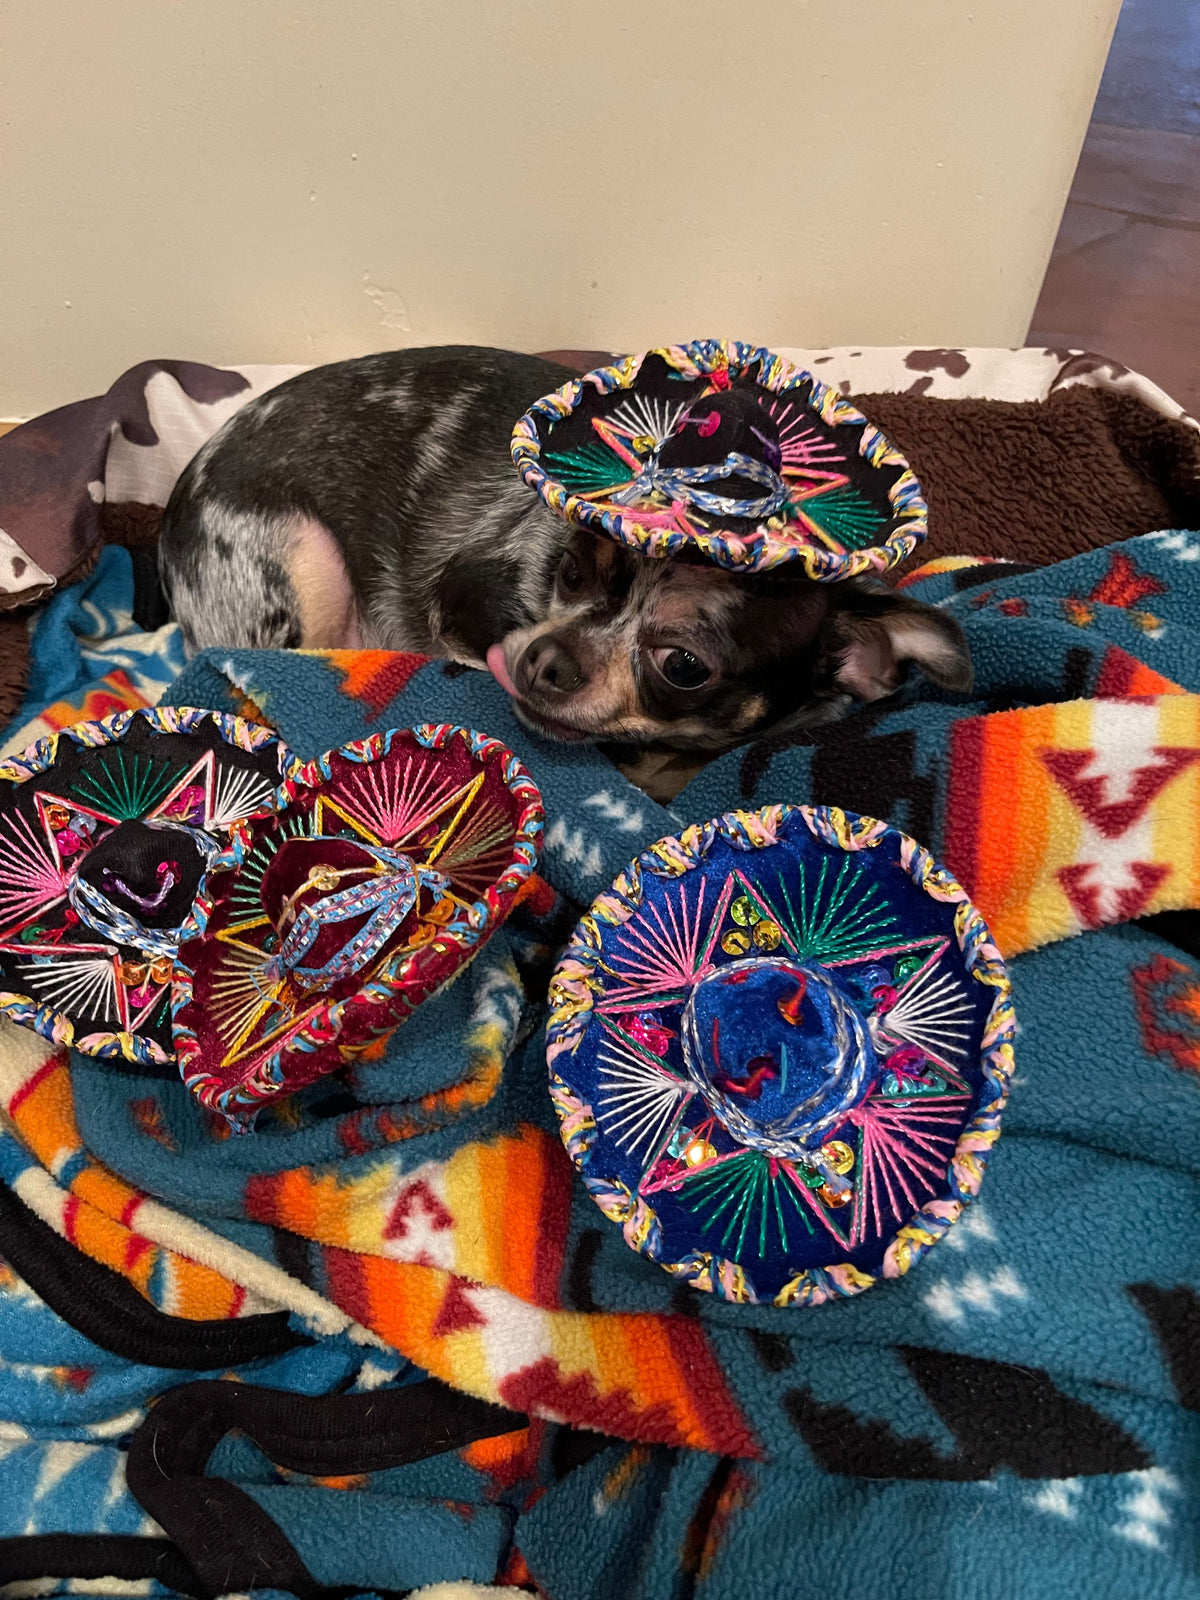 XS  Mexican sombrero hat decoration or pet dog use Southwest Bedazzle clothing